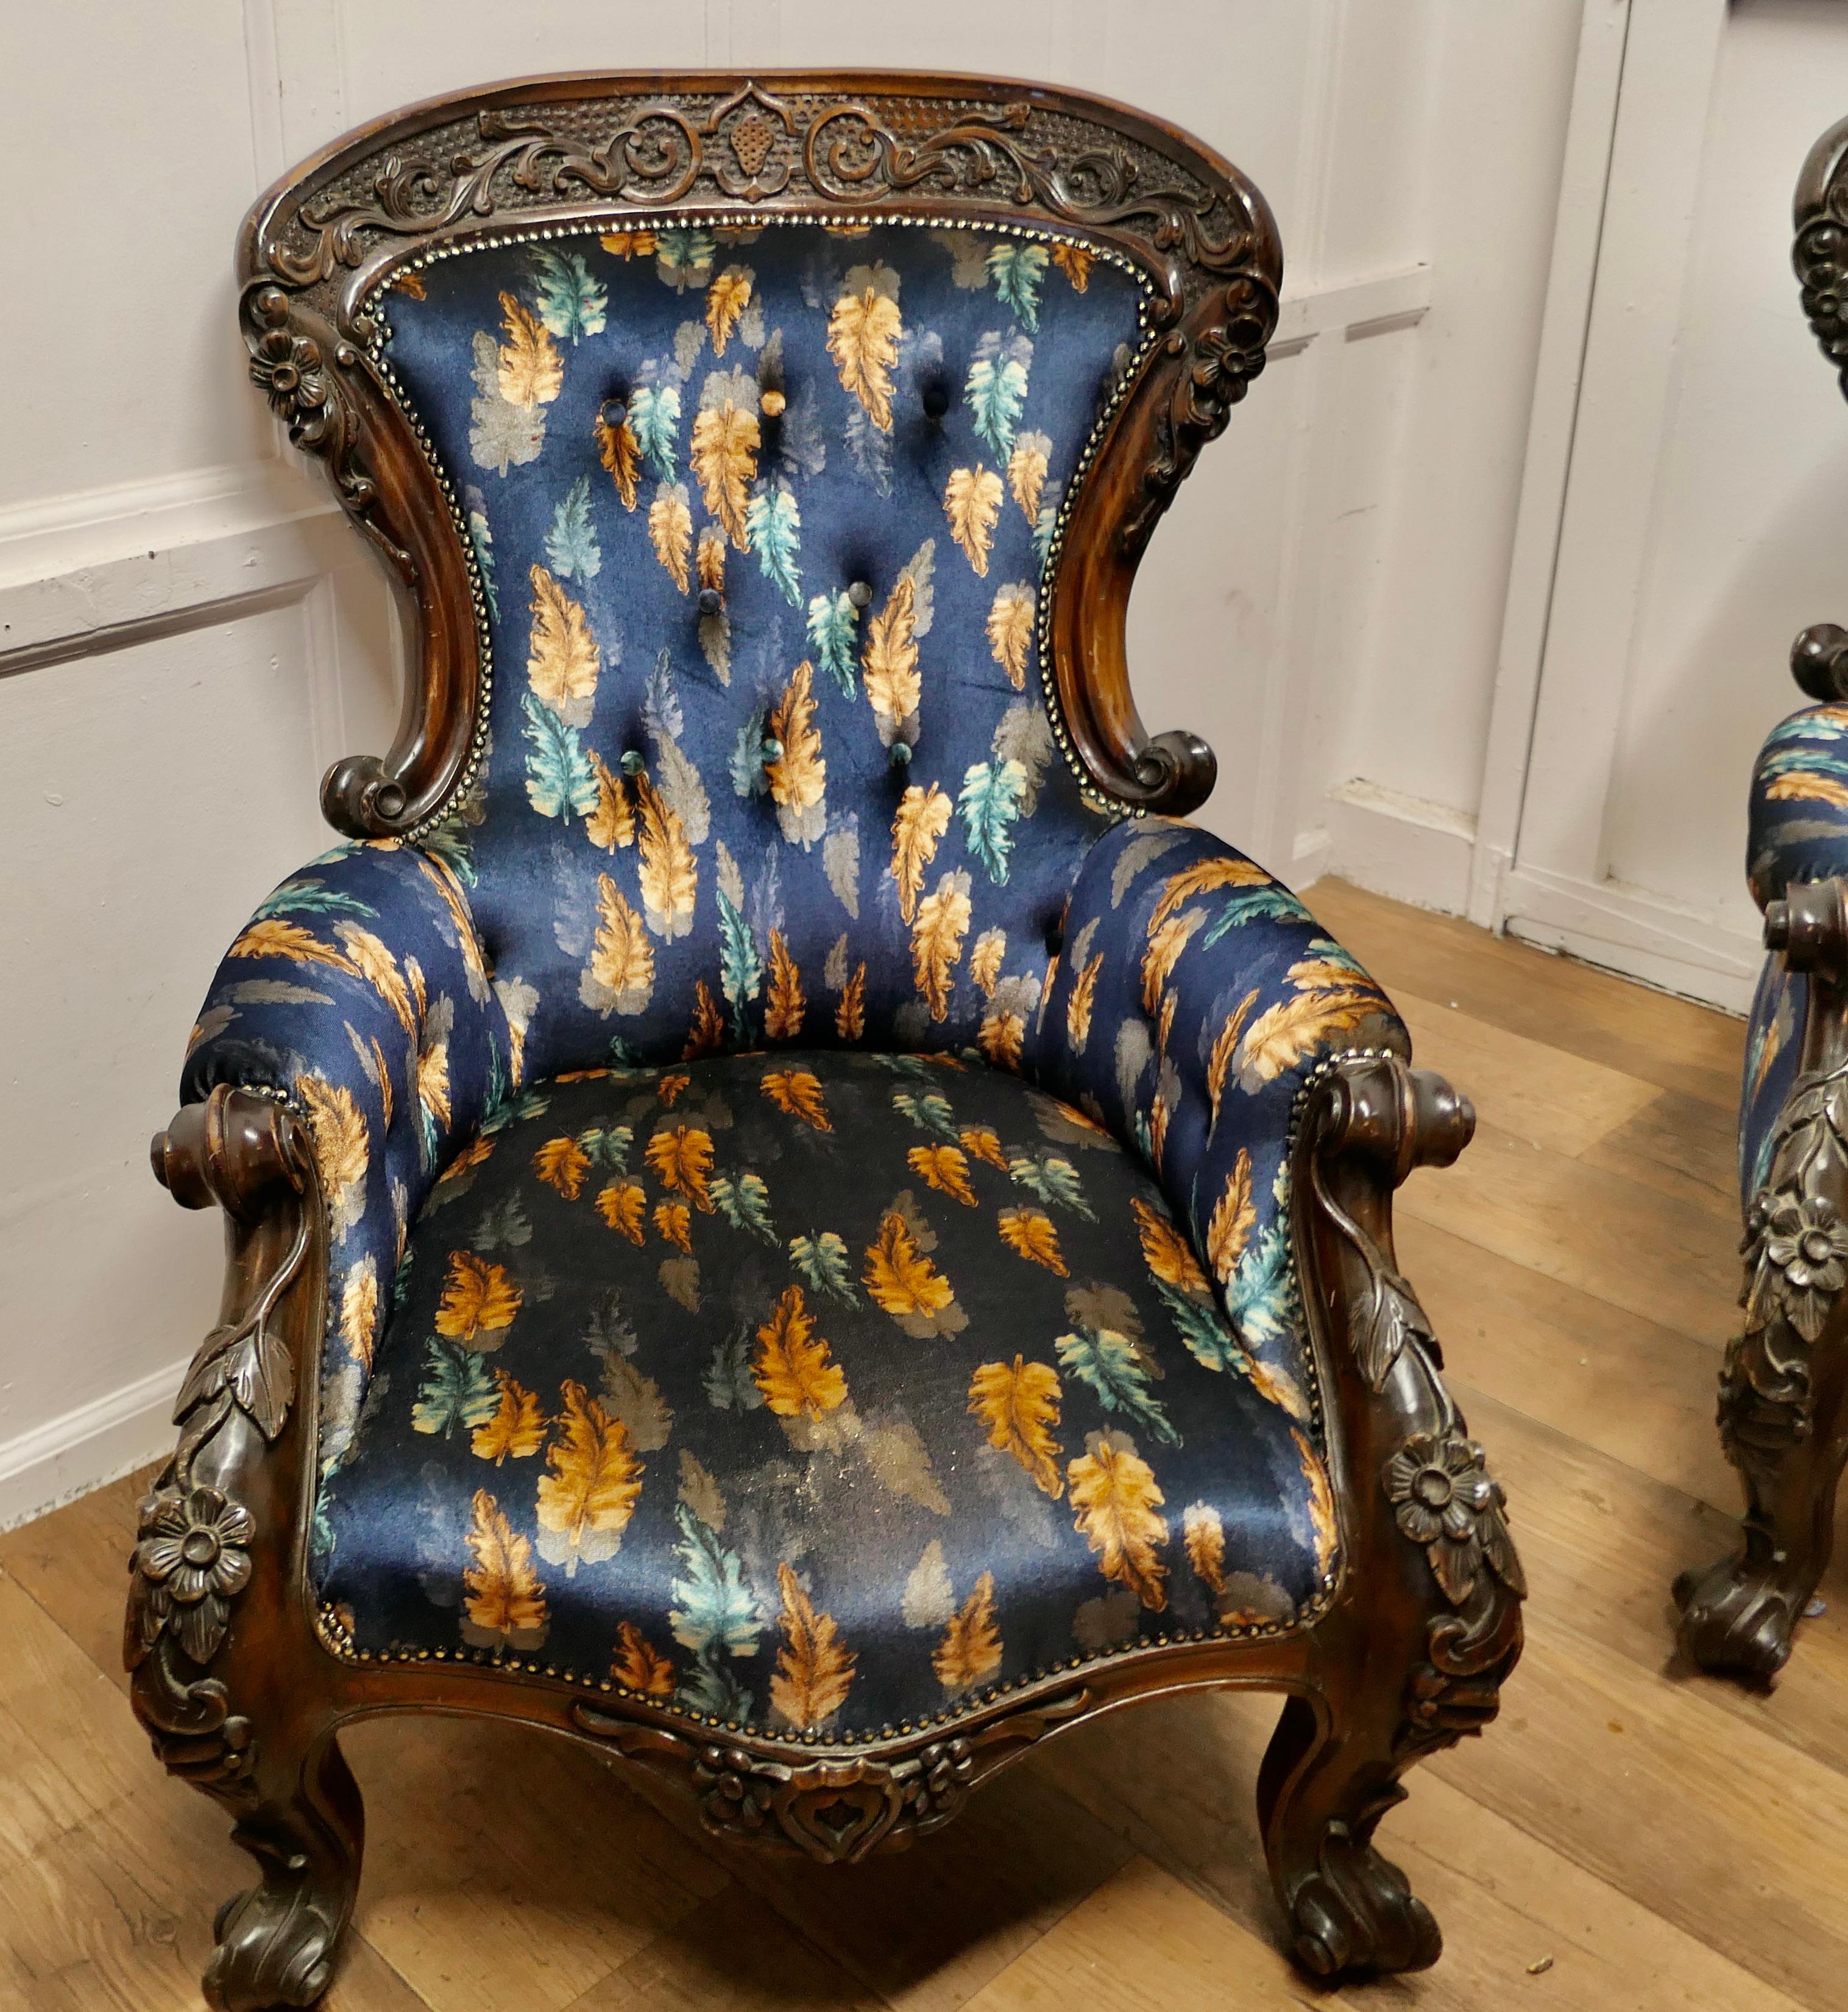 A Pair of Large Franco Chinese Carved Salon Chairs   In Excellent Condition For Sale In Chillerton, Isle of Wight